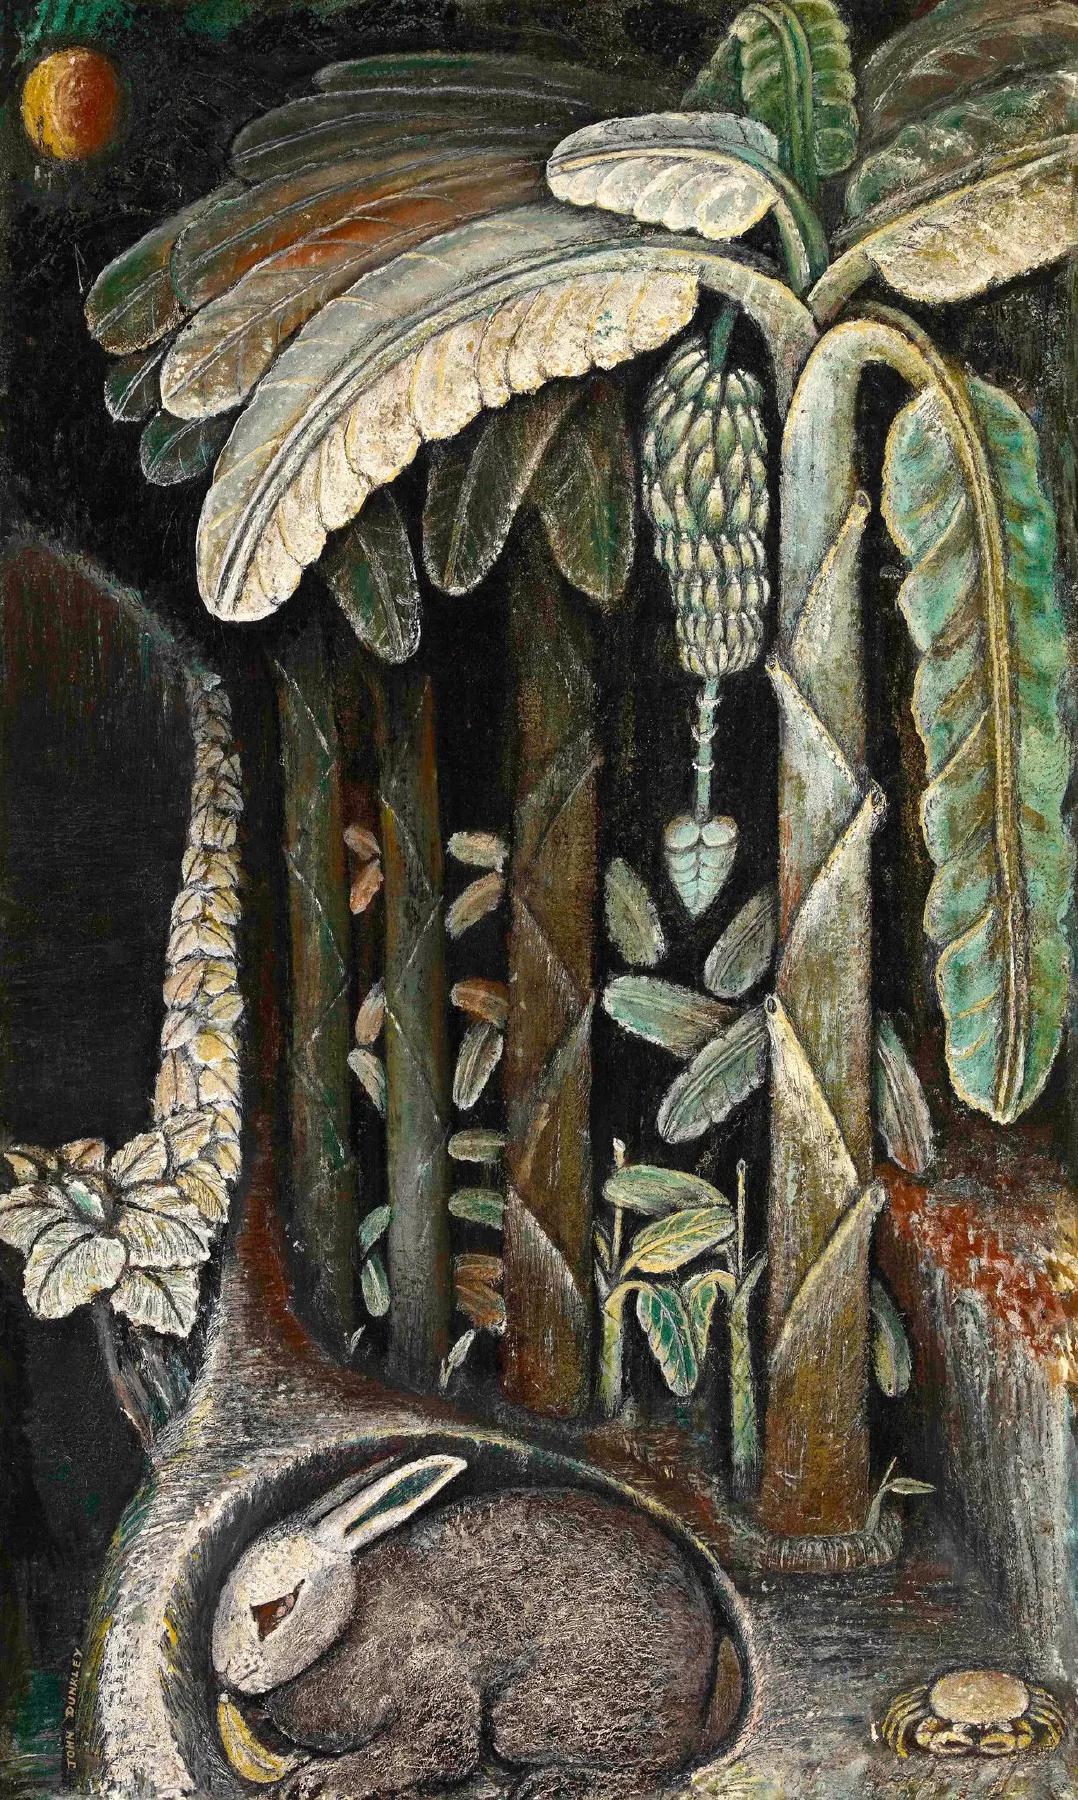 a painting by John Dunkley, depicting a scene on a banana plantation, mostly in dark colors. a rabbit and a crab shelter in the foreground 